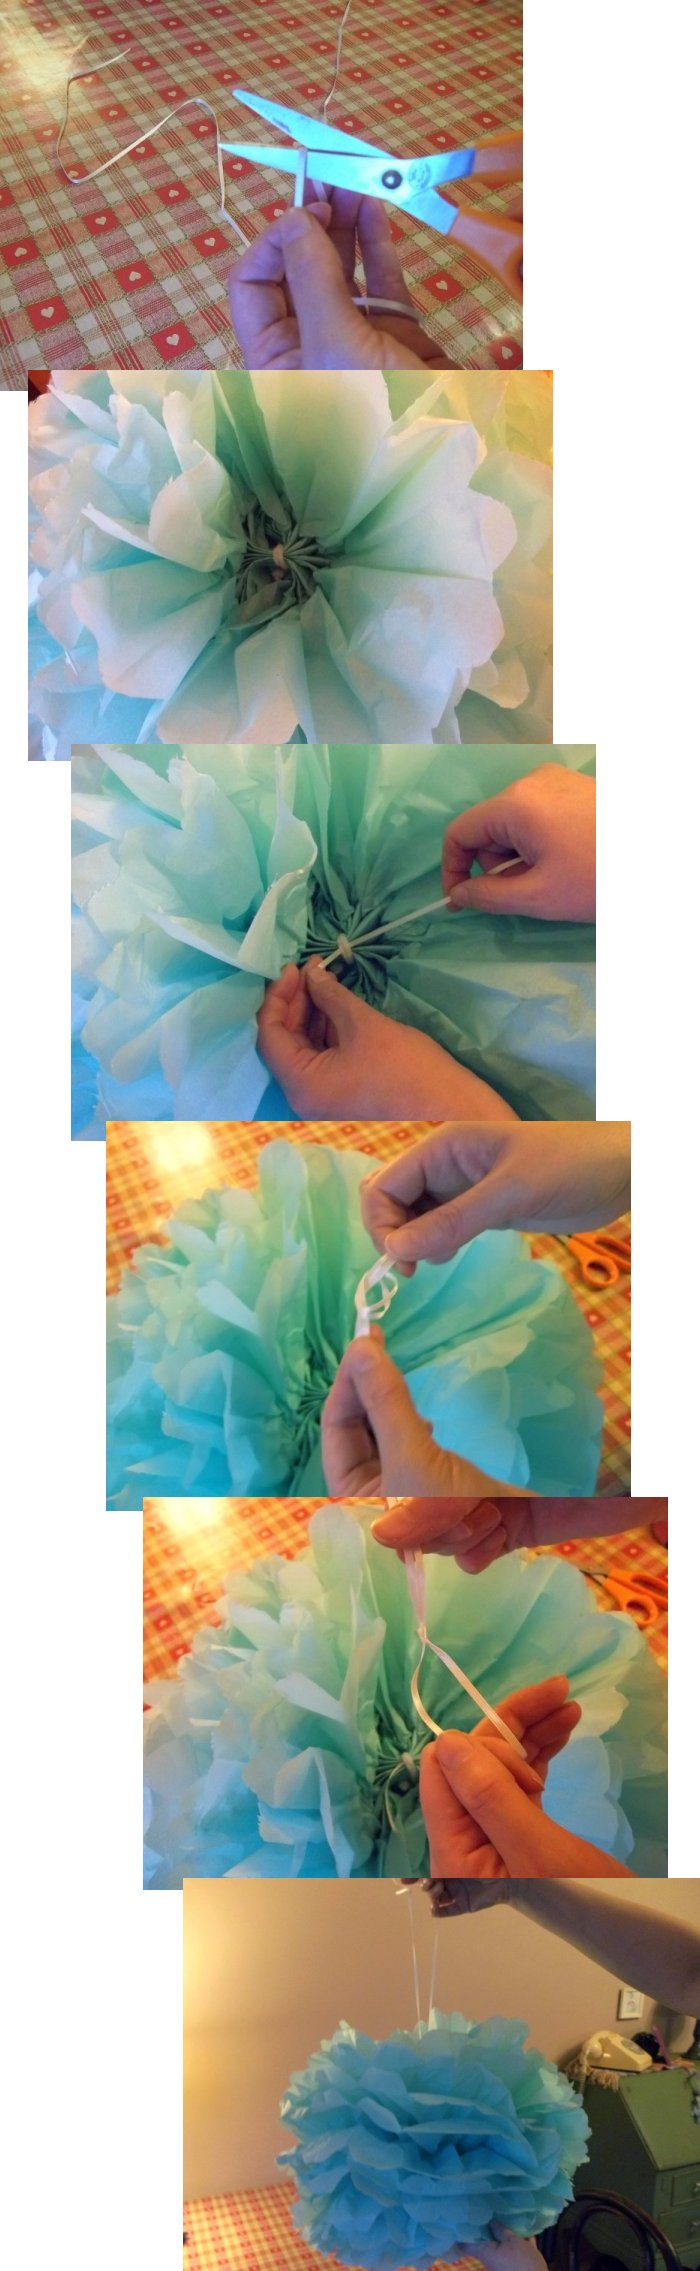 Things to make and do - Tissue paper pom-poms